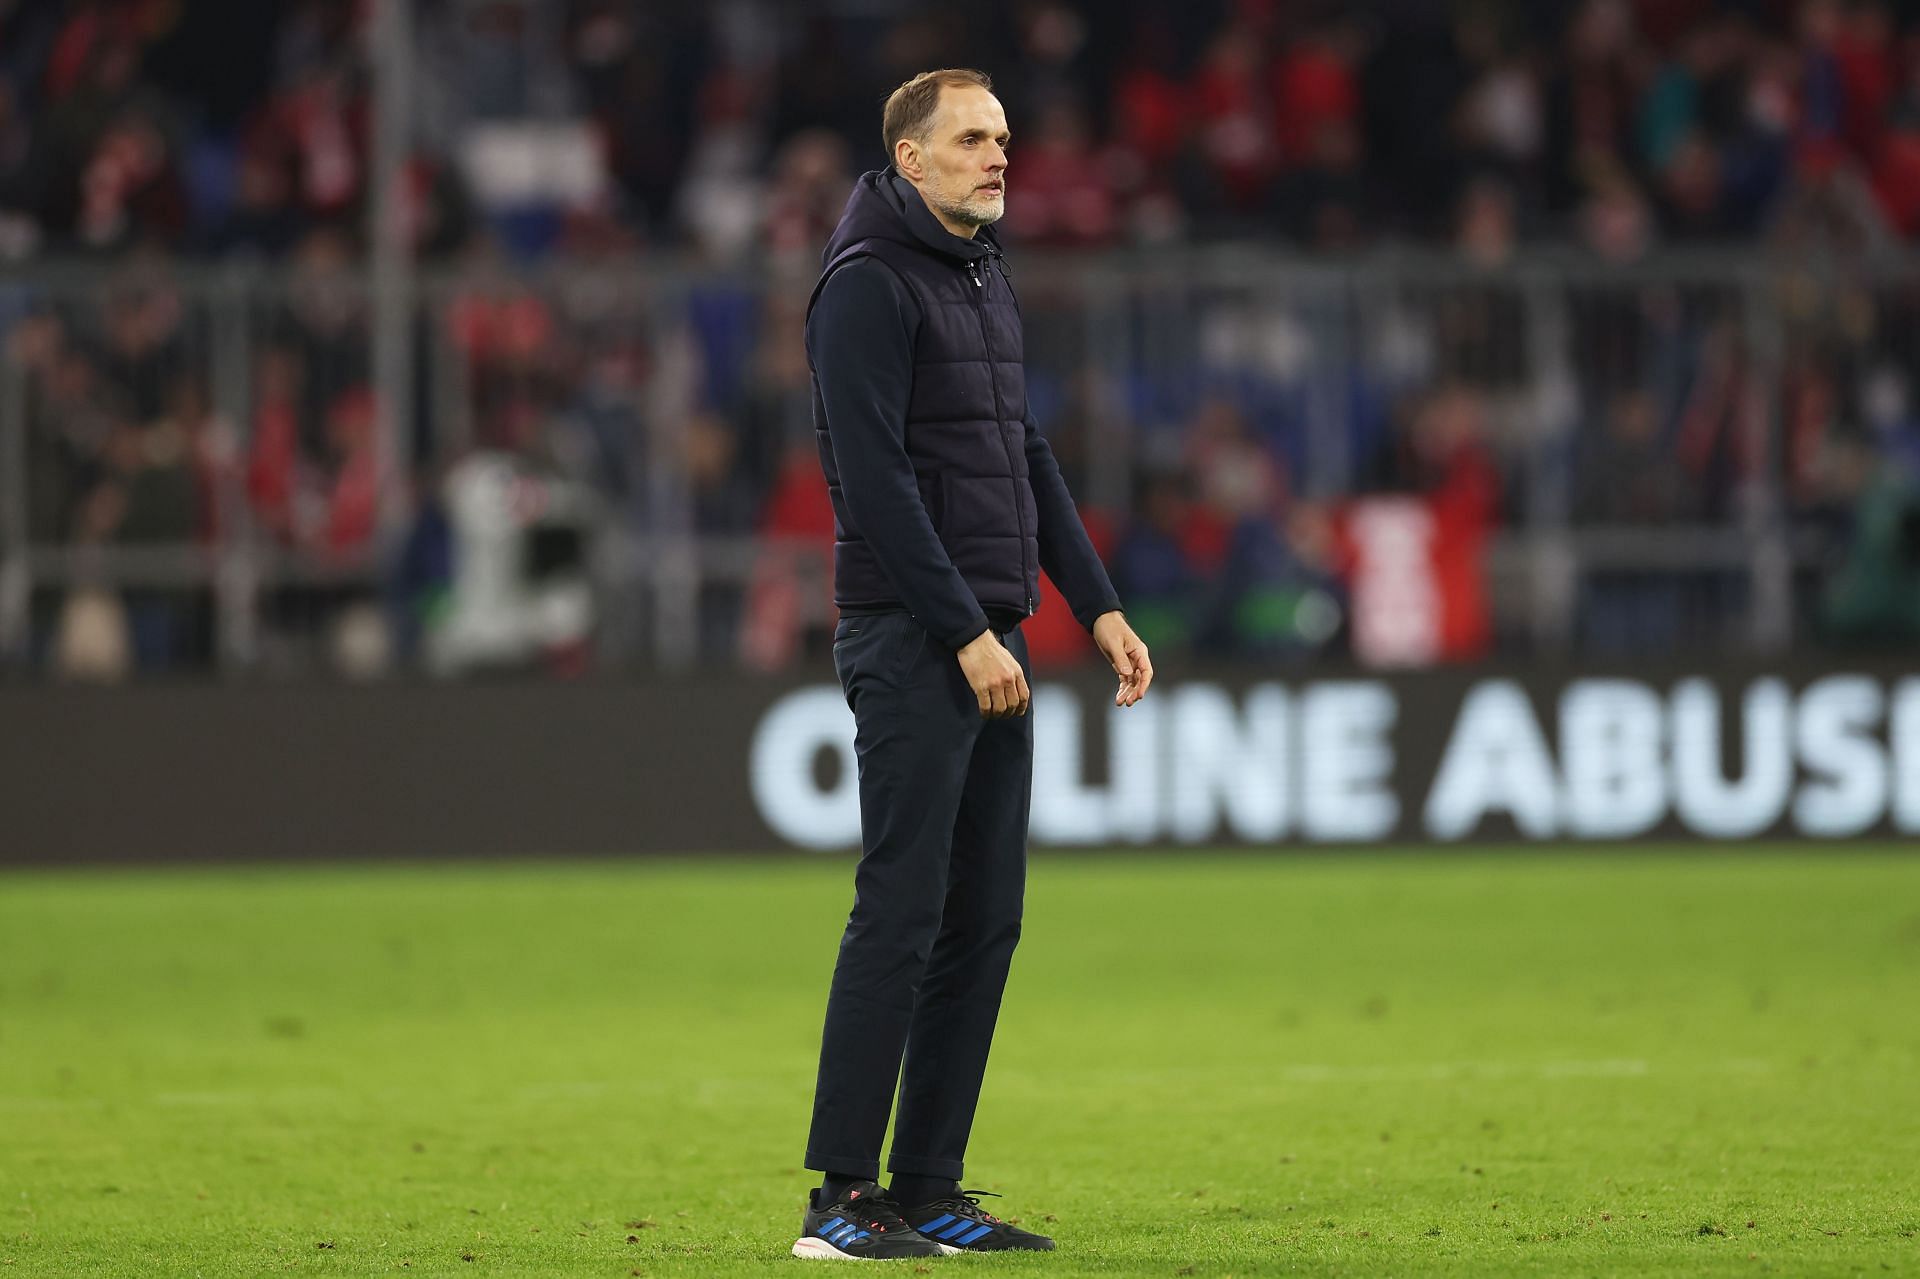 Tuchel has been served a baptism of fire in his Bayern job.